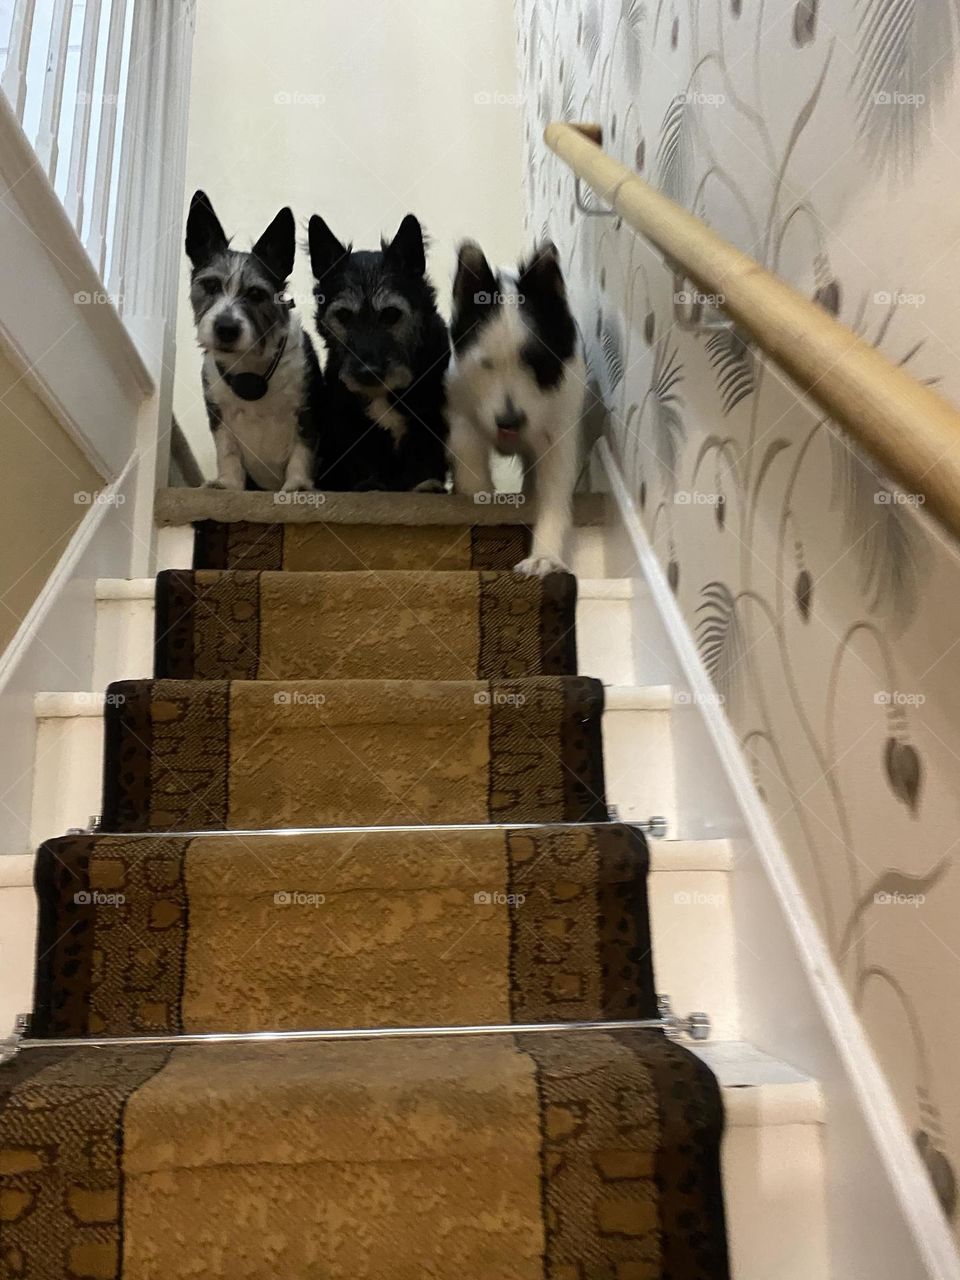 Dogs at top of the stairs